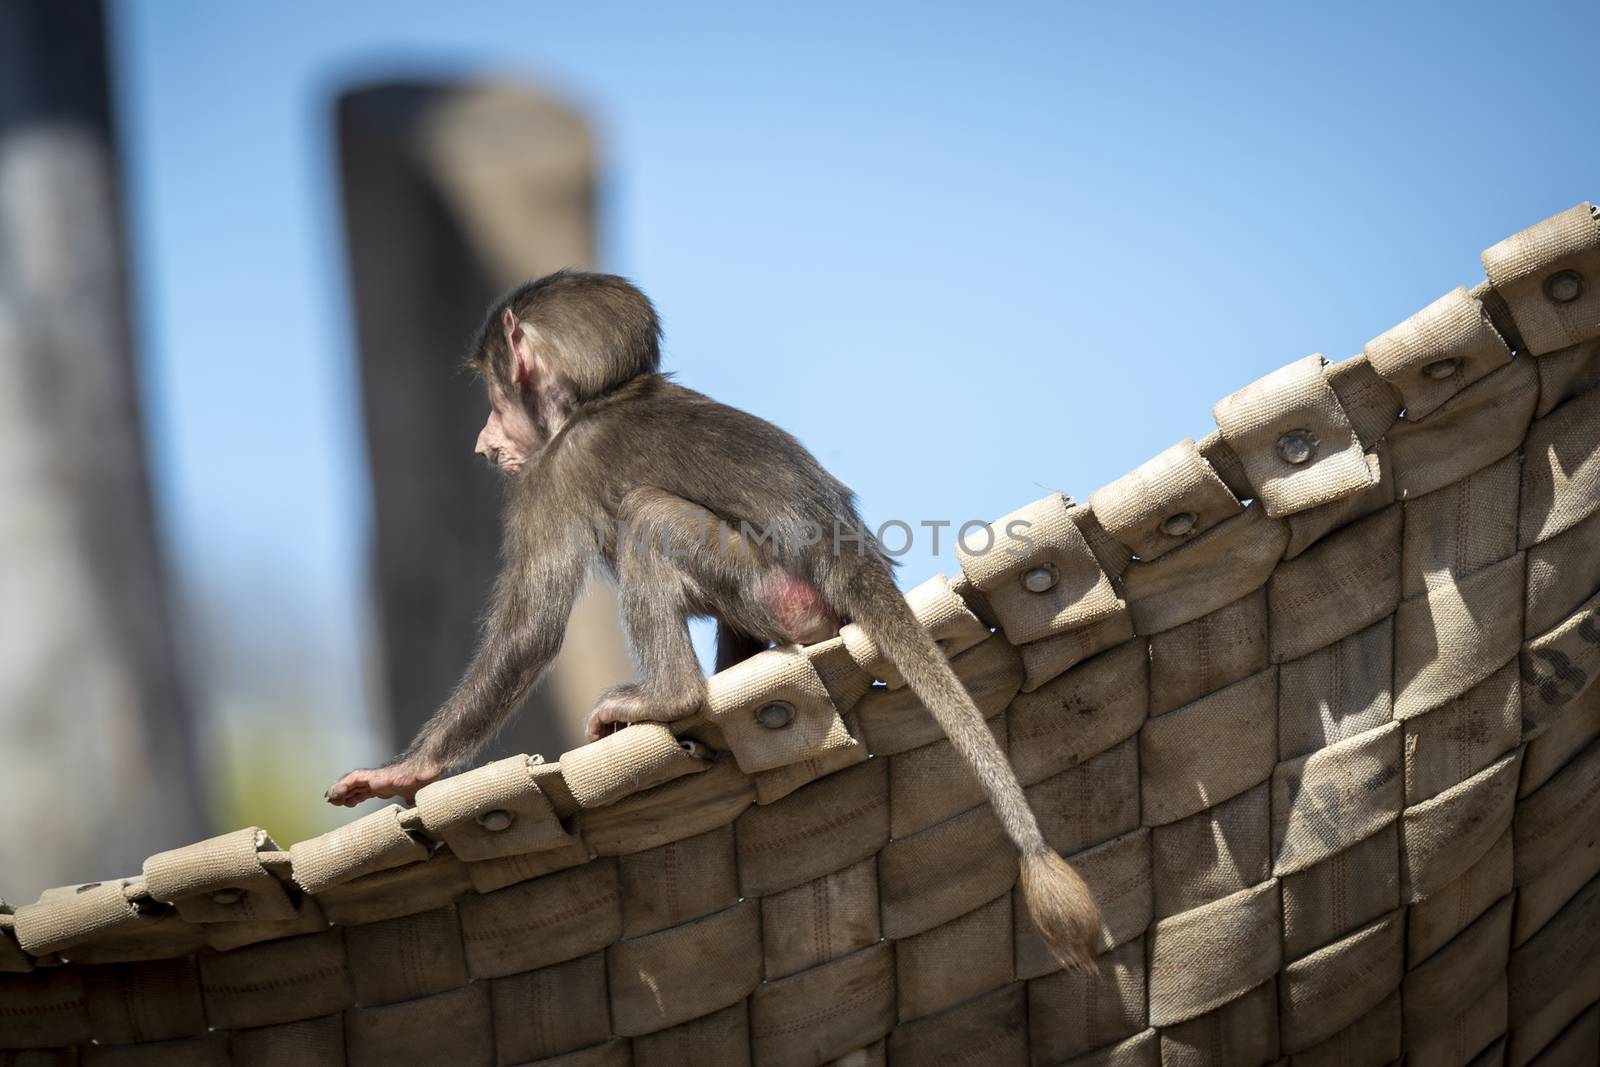 A baby Hamadryas Baboon playing on a wooden structure by WittkePhotos